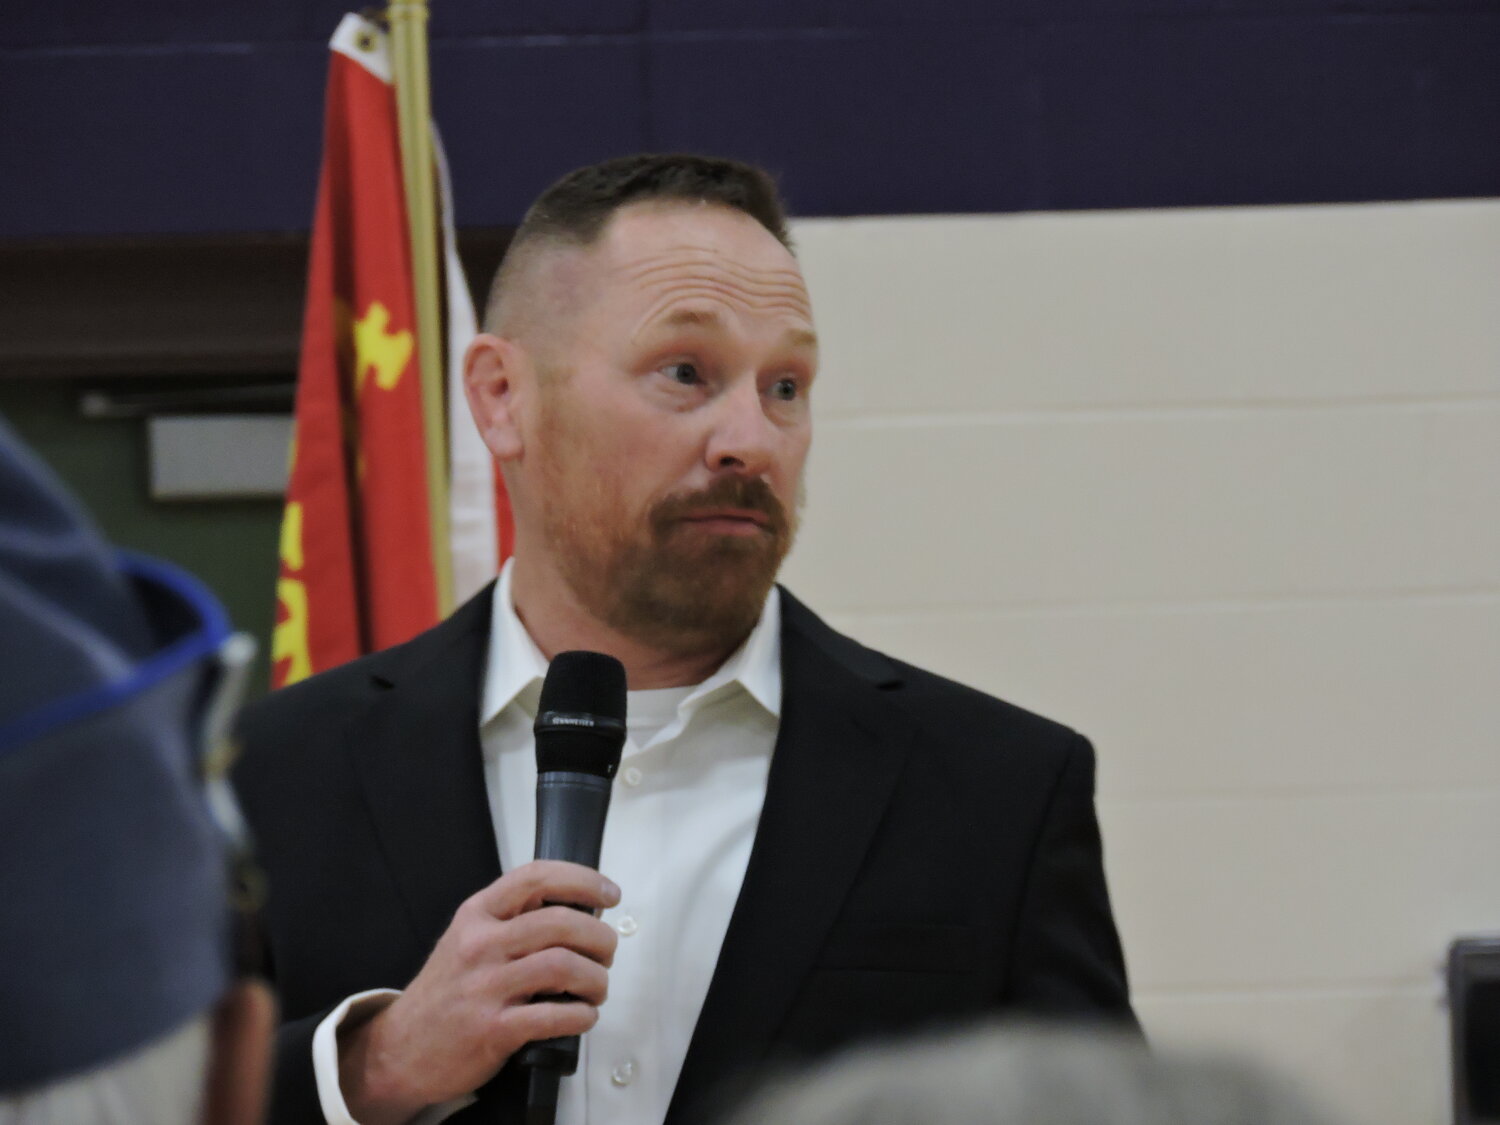 Lt. Col. Benjamin Wagner USMC (retired) was the featured speaker at the EMS Veterans Day ceremony Friday. He is EMS Principal Olin Morrison’s cousin.